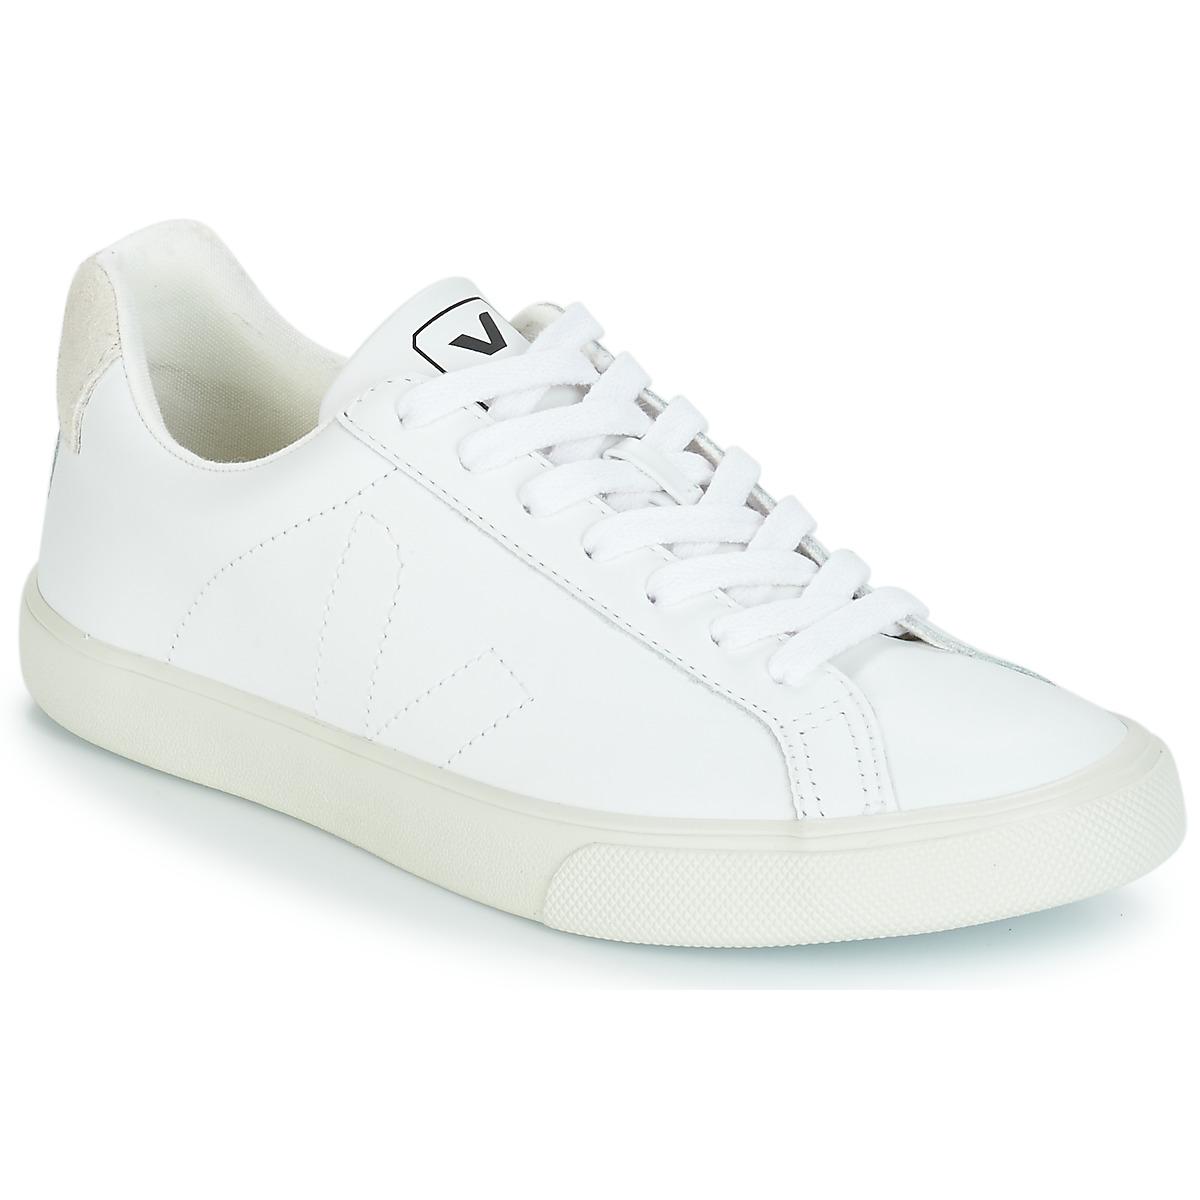 Veja Esplar Leather Low-Top Sneakers in White - Save 25% - Lyst